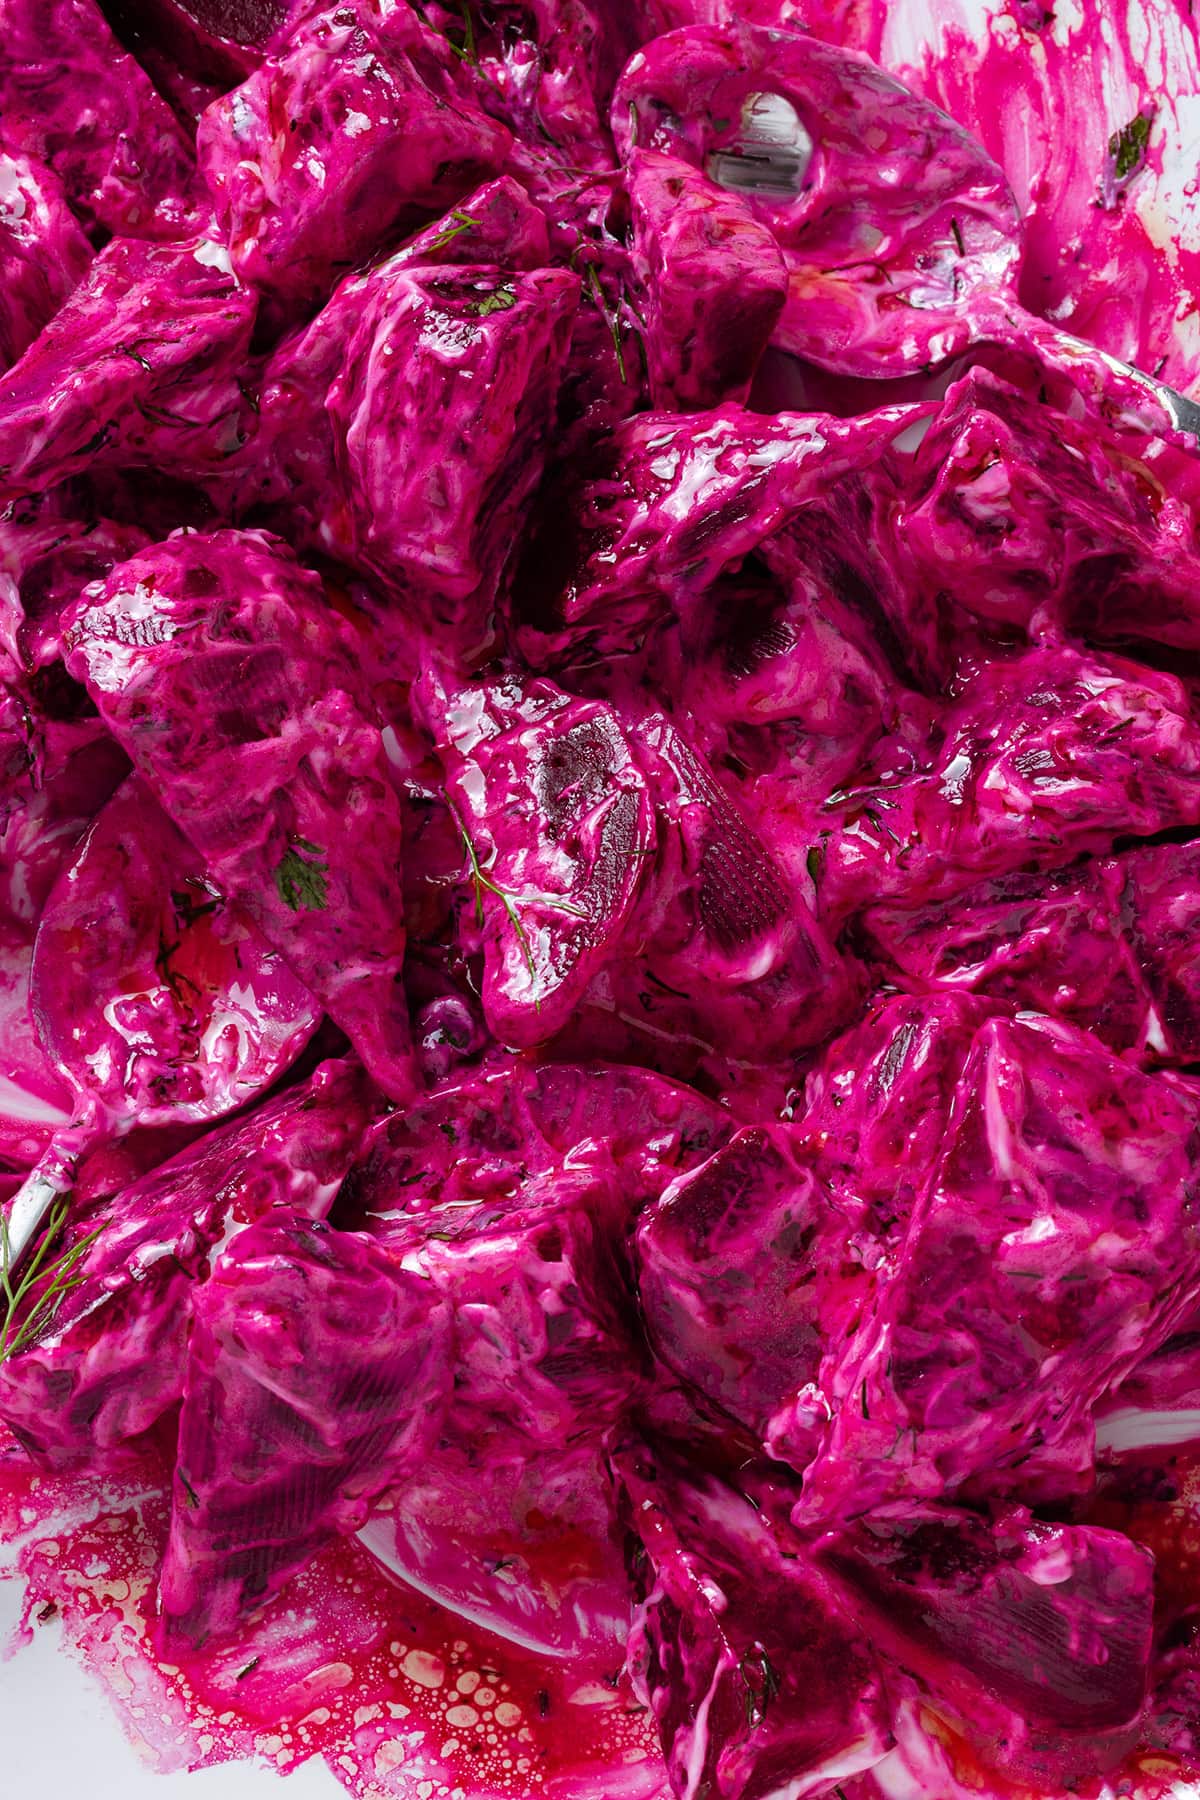 Bright pink beet salad with lemon vinaigrette and greek yogurt mixed with the beets.